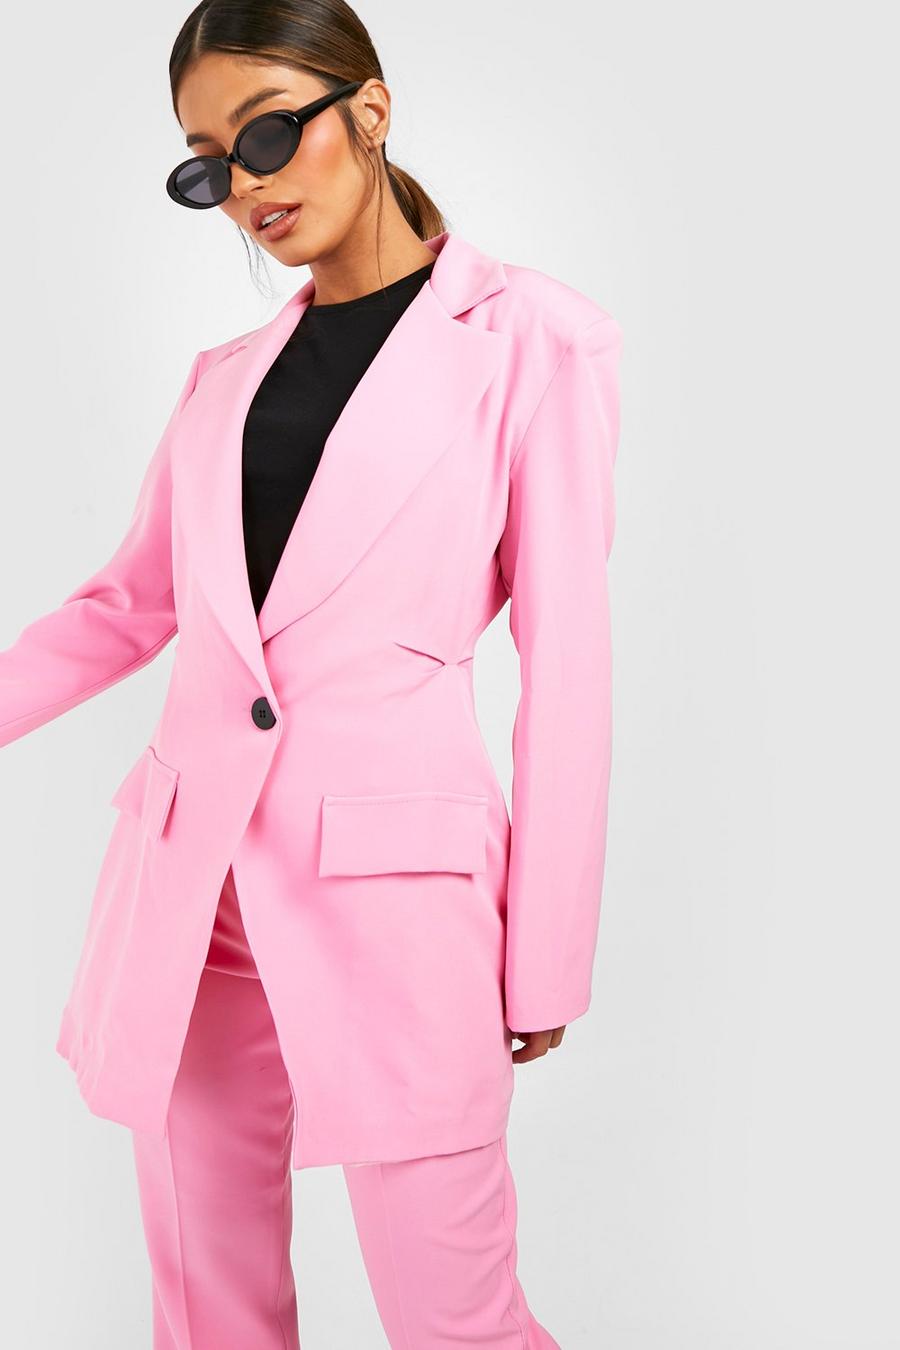 Candy pink Plunge Fitted Waist Tailored Blazer